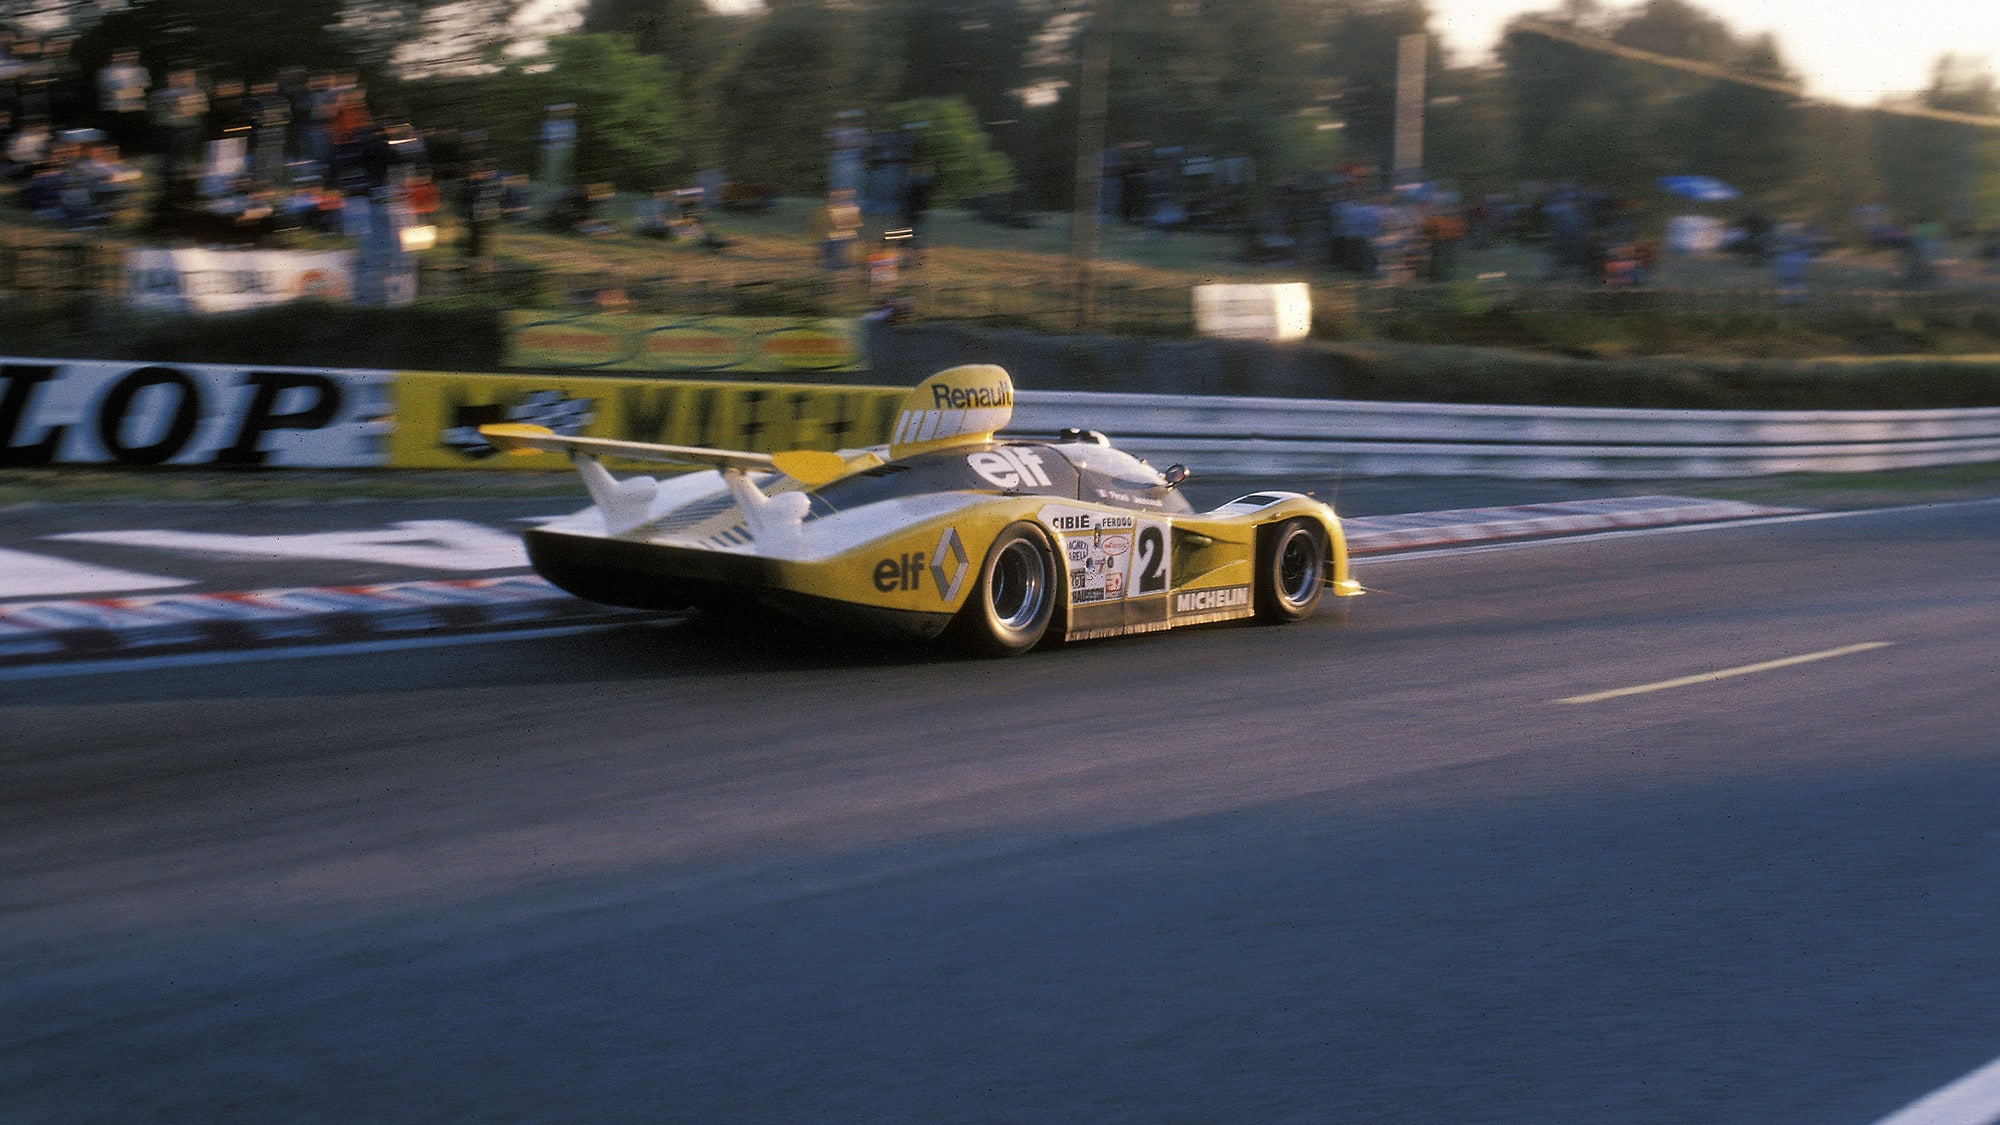 Renault-Alpine's 1978 Le Mans 24 Hours win: All for one June 2003 